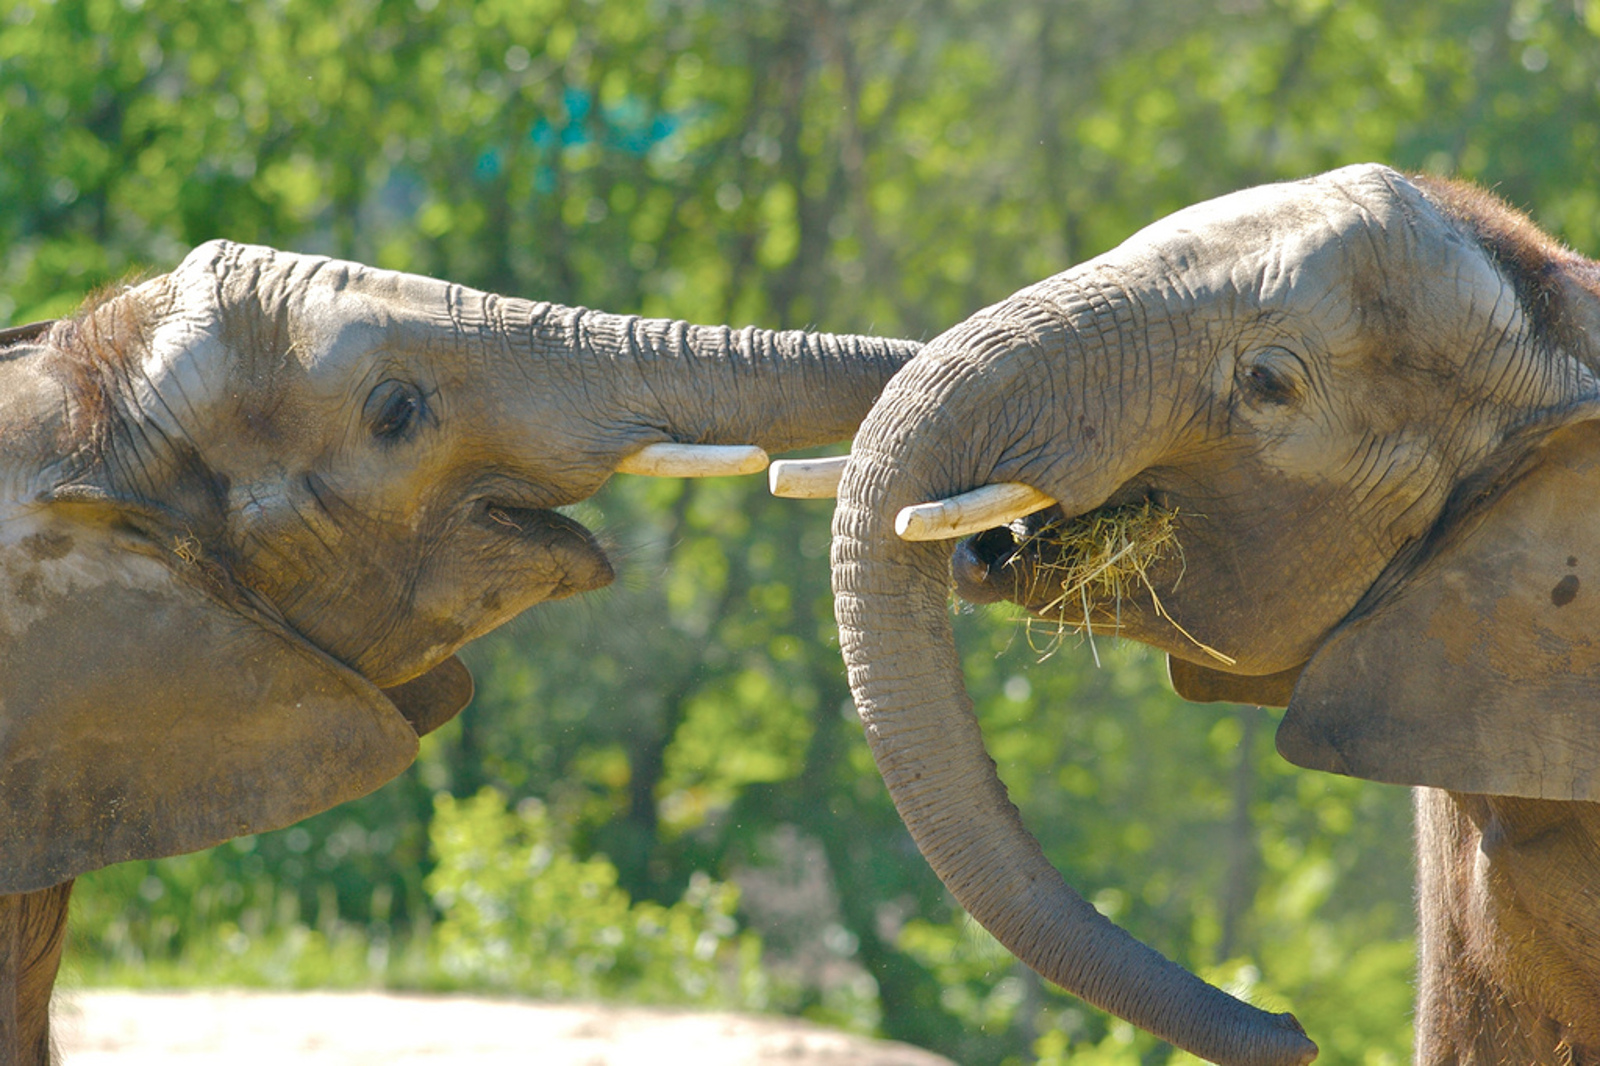 These 5 Sanctuaries are Dedicated to Saving Abused and Neglected Elephants